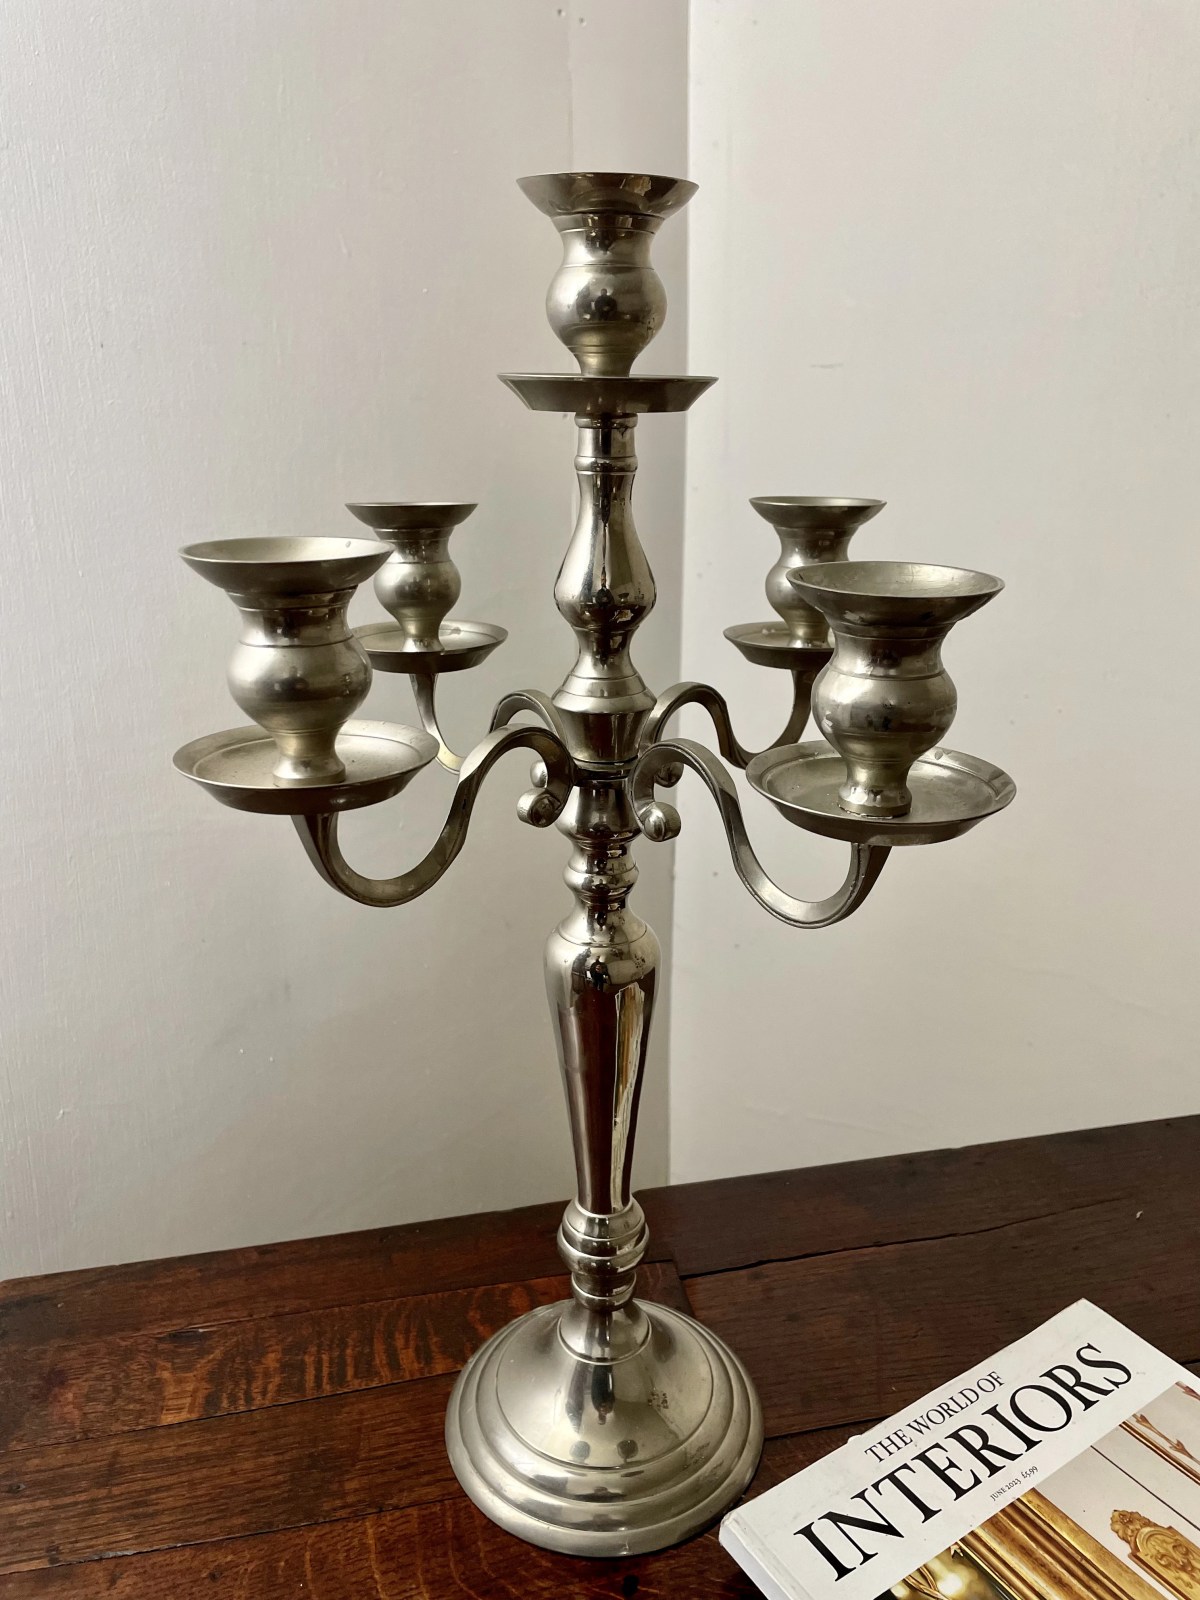 silver-plated-candlesticks